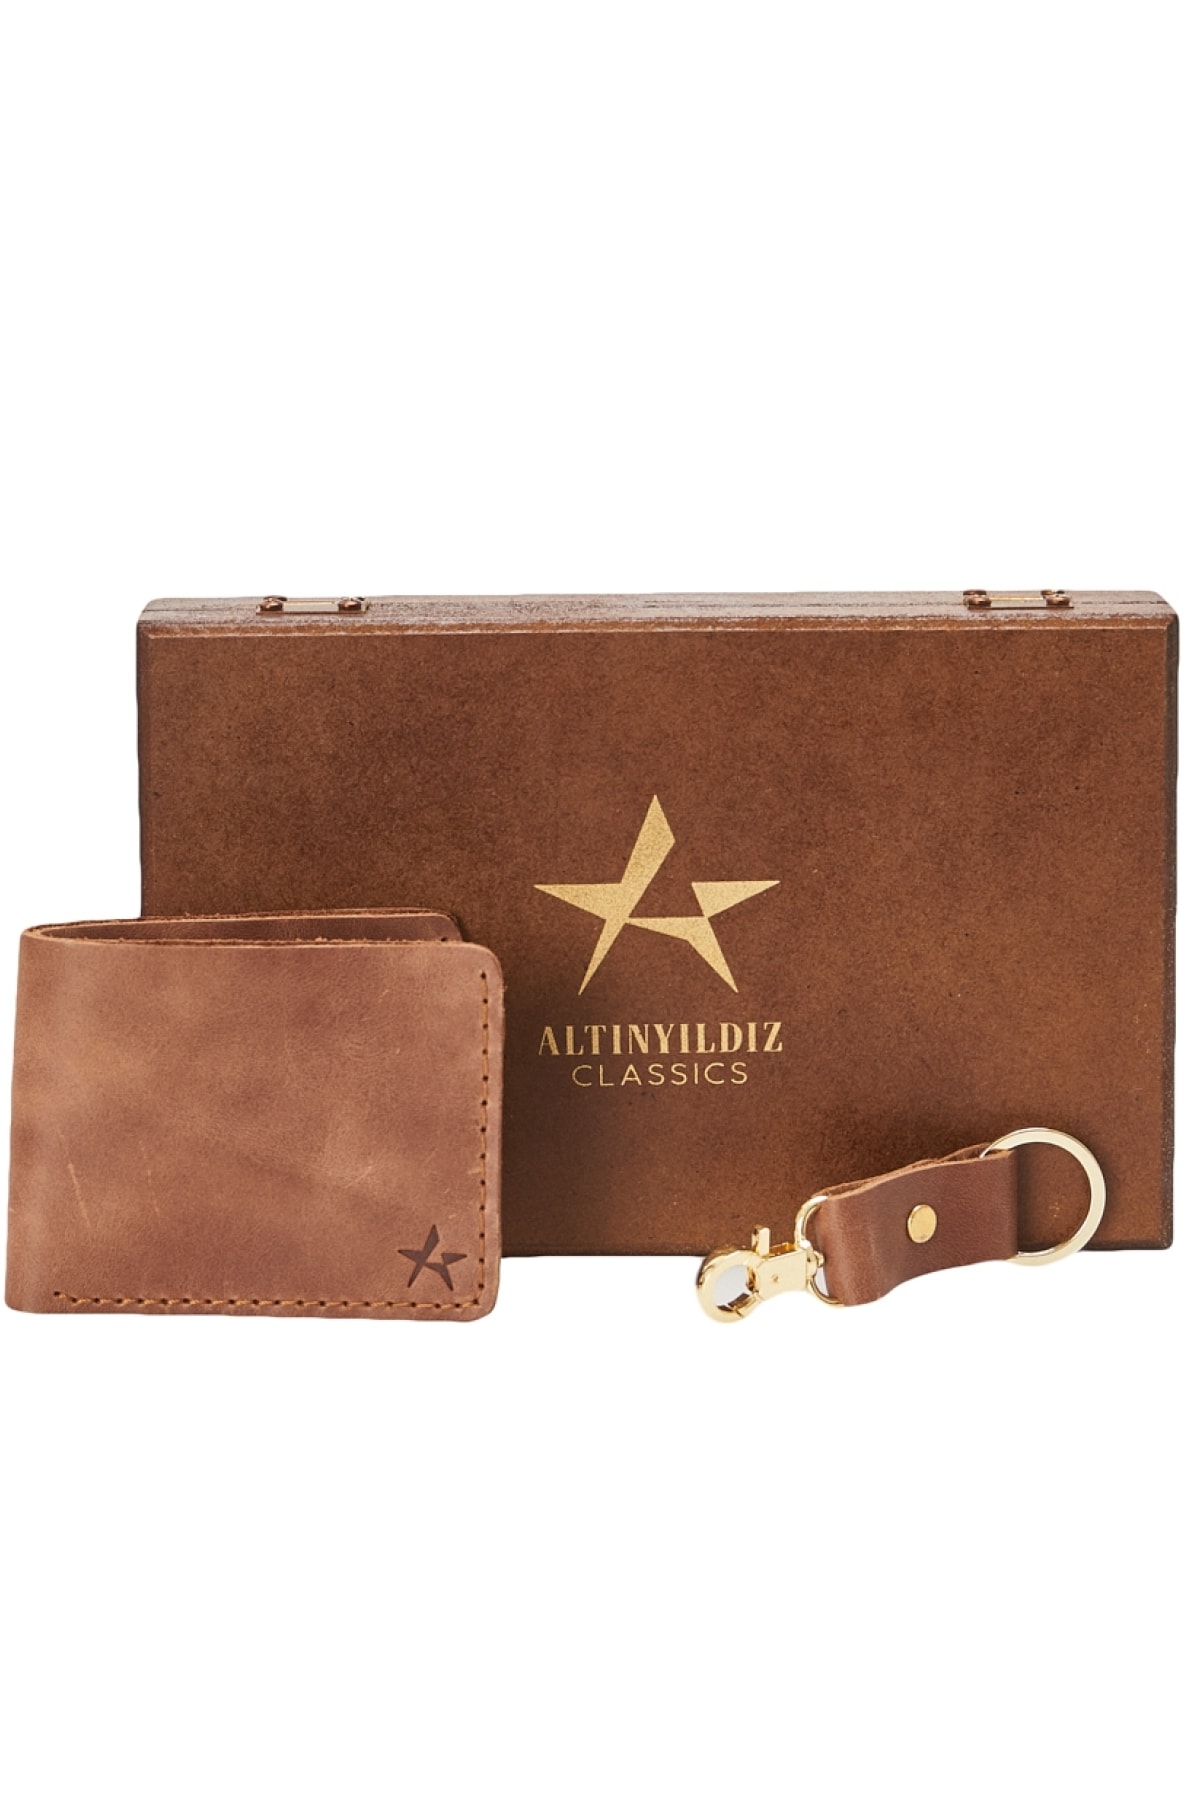 ALTINYILDIZ CLASSICS Men's Brown Special Gift Boxed 100% Genuine Leather Wallet-Keychain Set